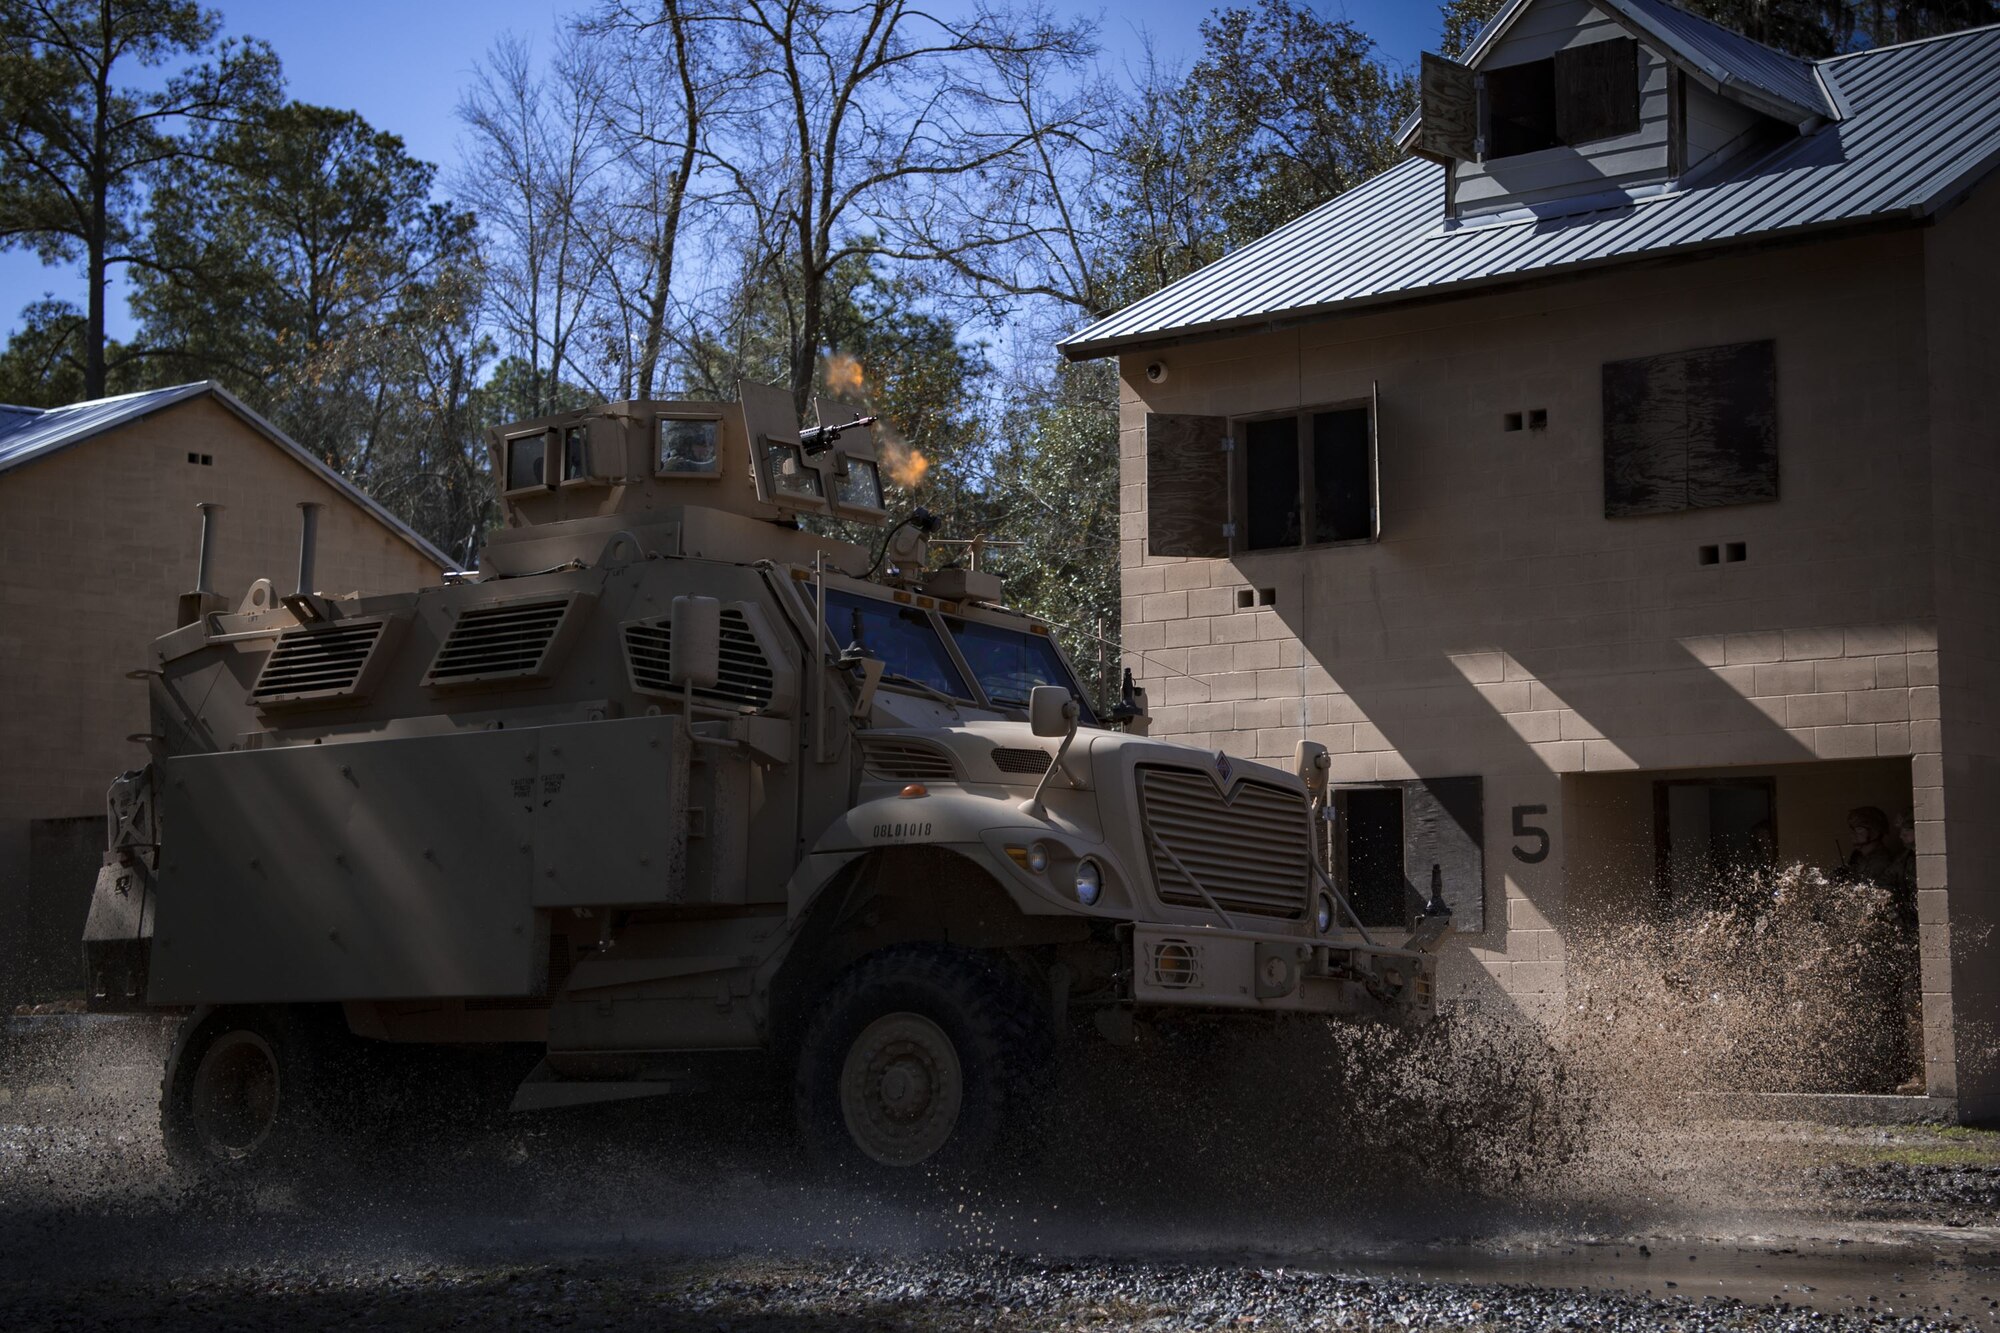 Airmen assigned to the 820th Base Defense Group drive a mine-resistant, ambush-protected vehicle during a capabilities demonstration, Feb. 5, 2018, at Moody Air Force Base, Ga. The immersion was designed to give the 23d Wing’s leadership a better understanding of the 820th BDG’s mission, capabilities and training needs. (U.S. Air Force photo by Senior Airman Daniel Snider)